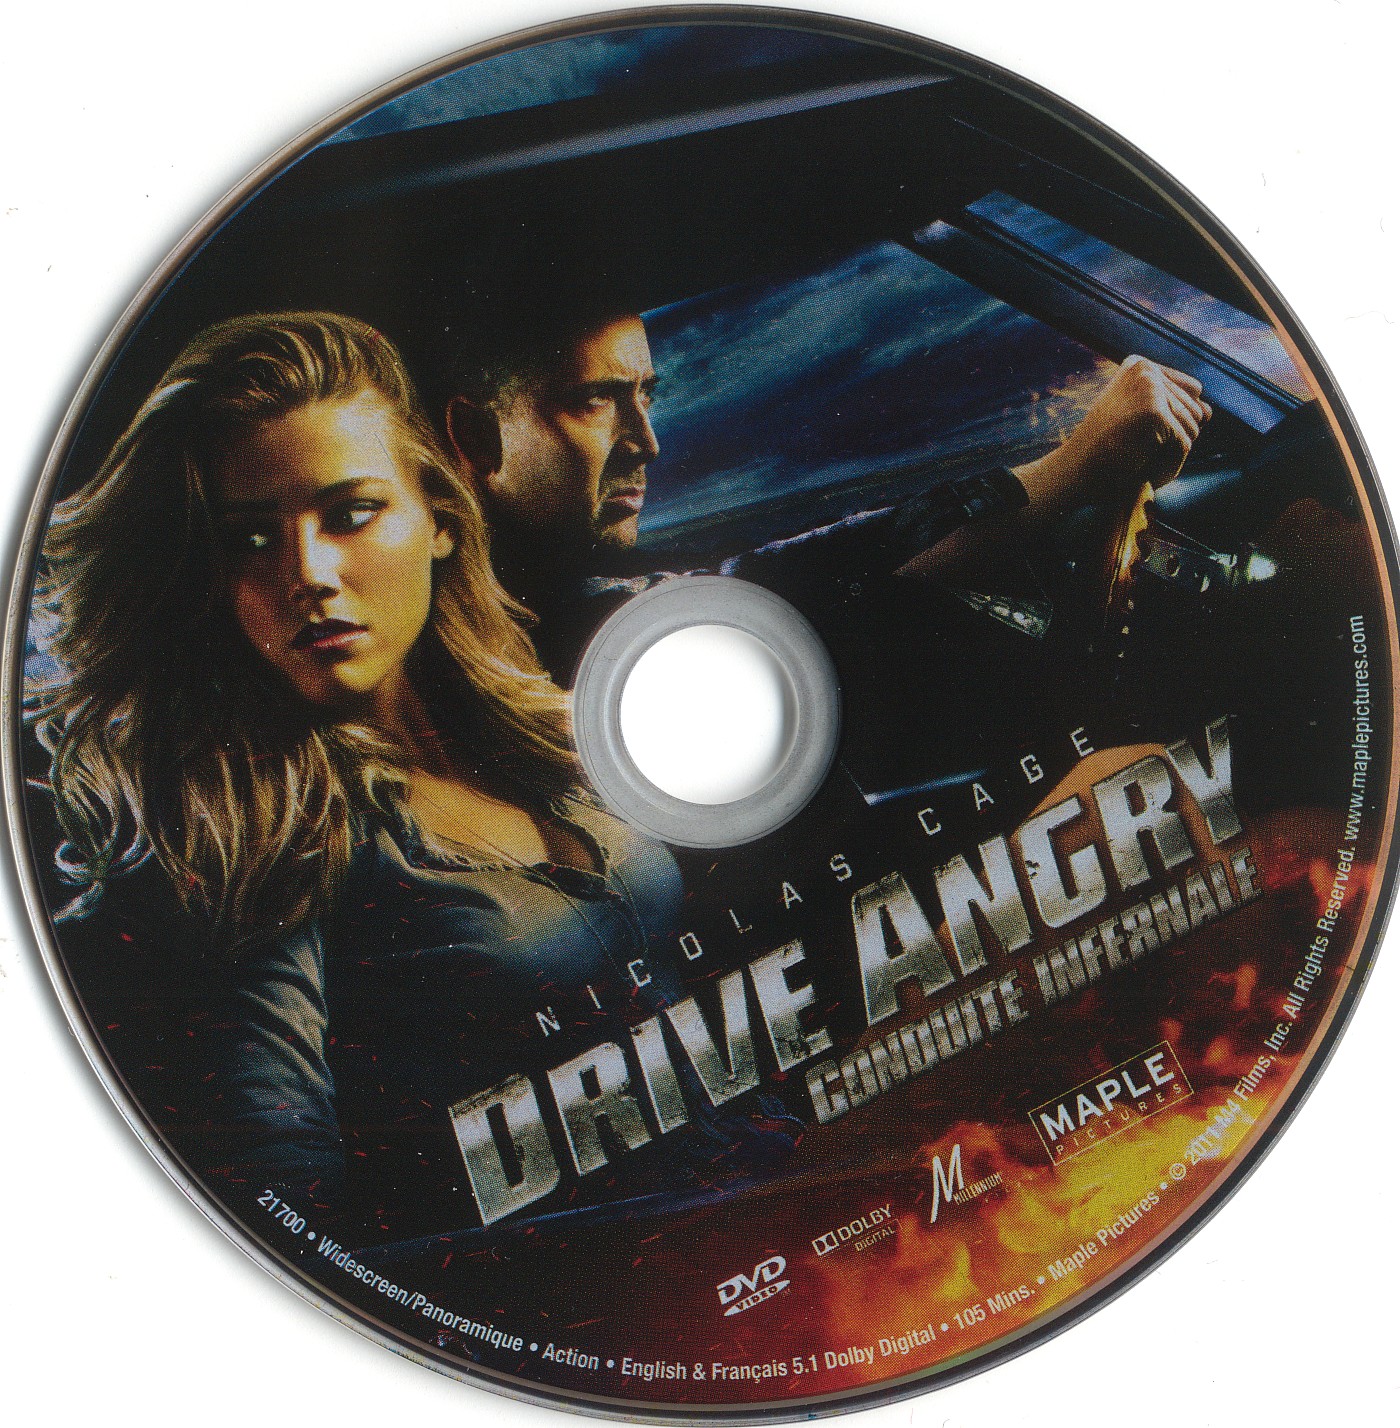 Drive angry - Conduite infernale (Canadienne)